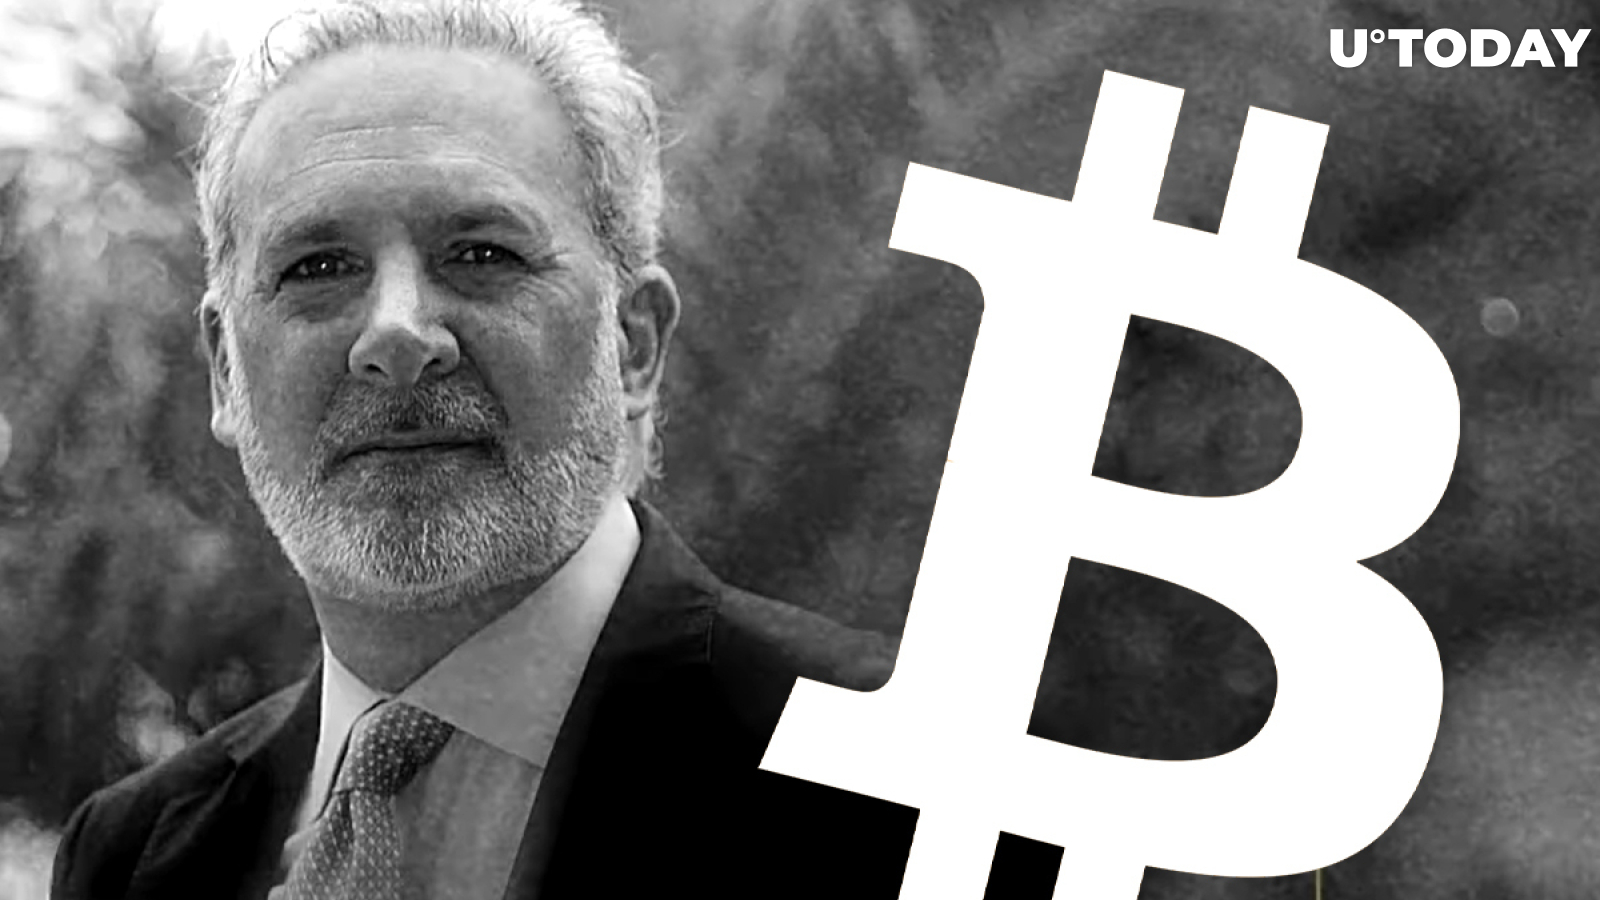 "Bitcoin Influencer" Peter Schiff Opines on Why Bitcoin Is Losing Market Dominance